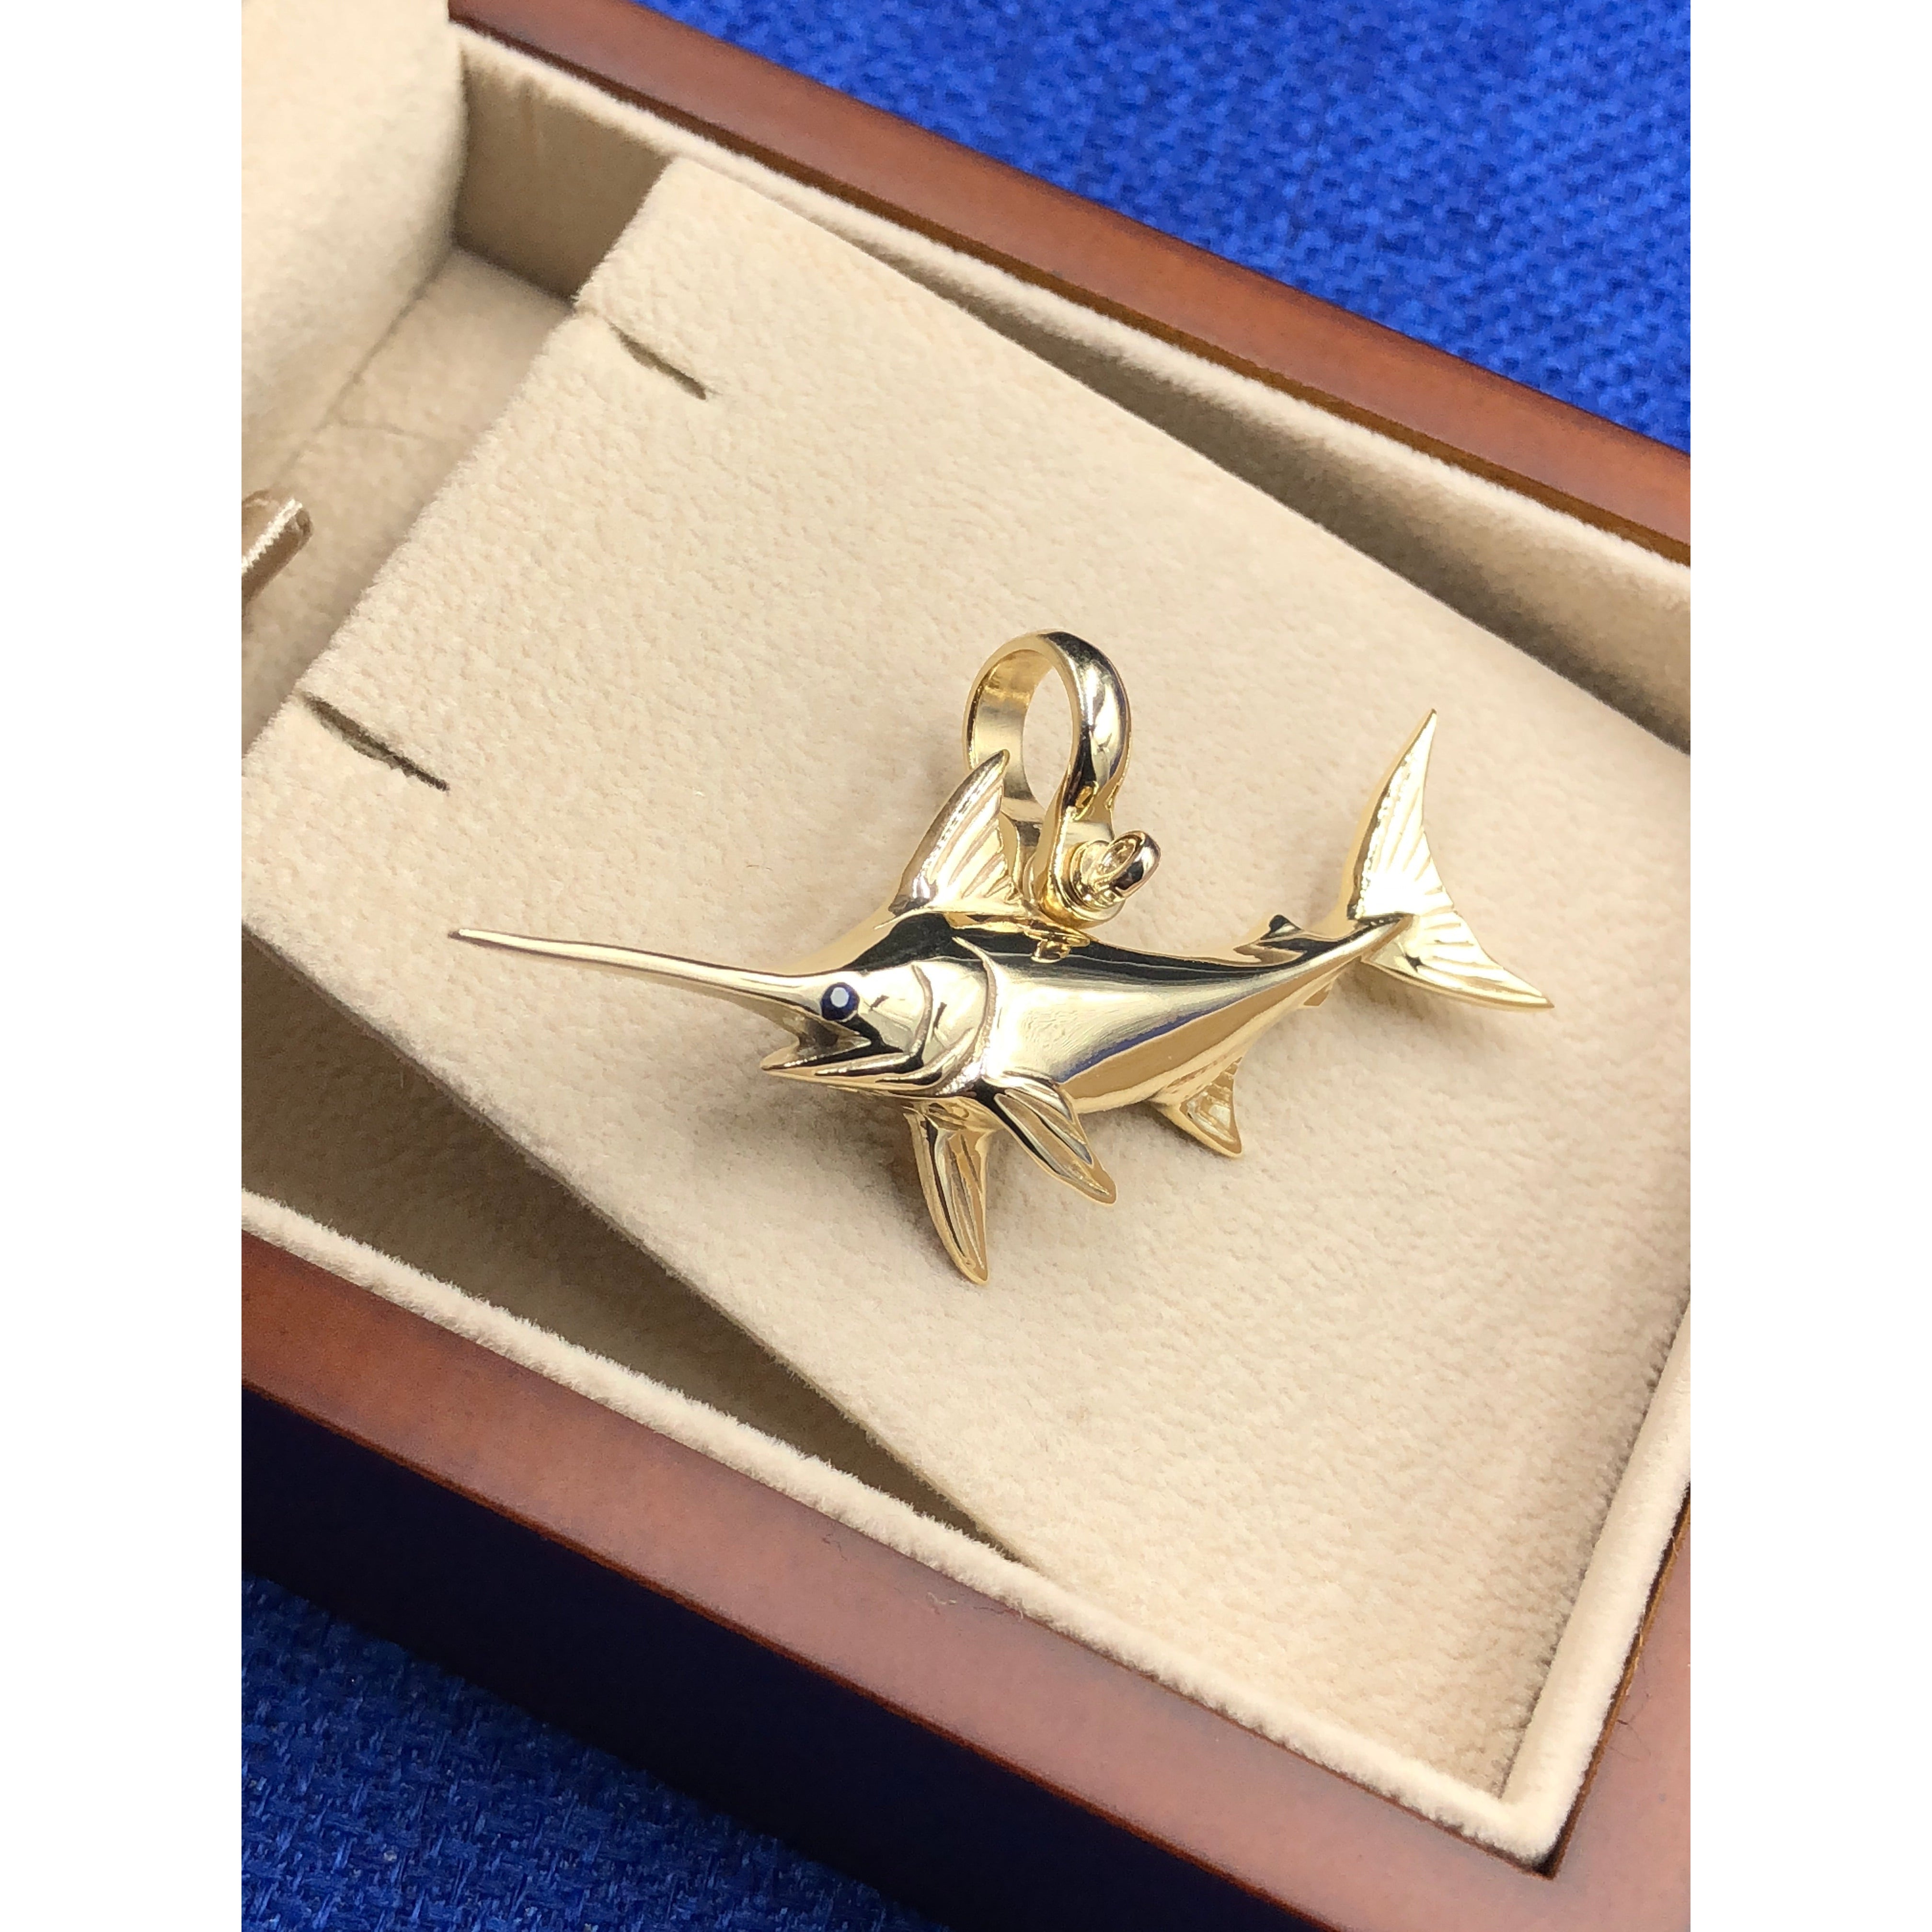 Nautical Treasure ® 10K 14K 18K Gold Swordfish Pendant with Sapphire Eye and Large Shackle Bail (fits up to 8mm chain). Pendant Specificatons Measurement: 2 1/4" in length approximately Weight: 14 Grams Nautical Jewelry, Mens Jewelry, Fishing Jewelry, Angler, Broadbill Swordfish